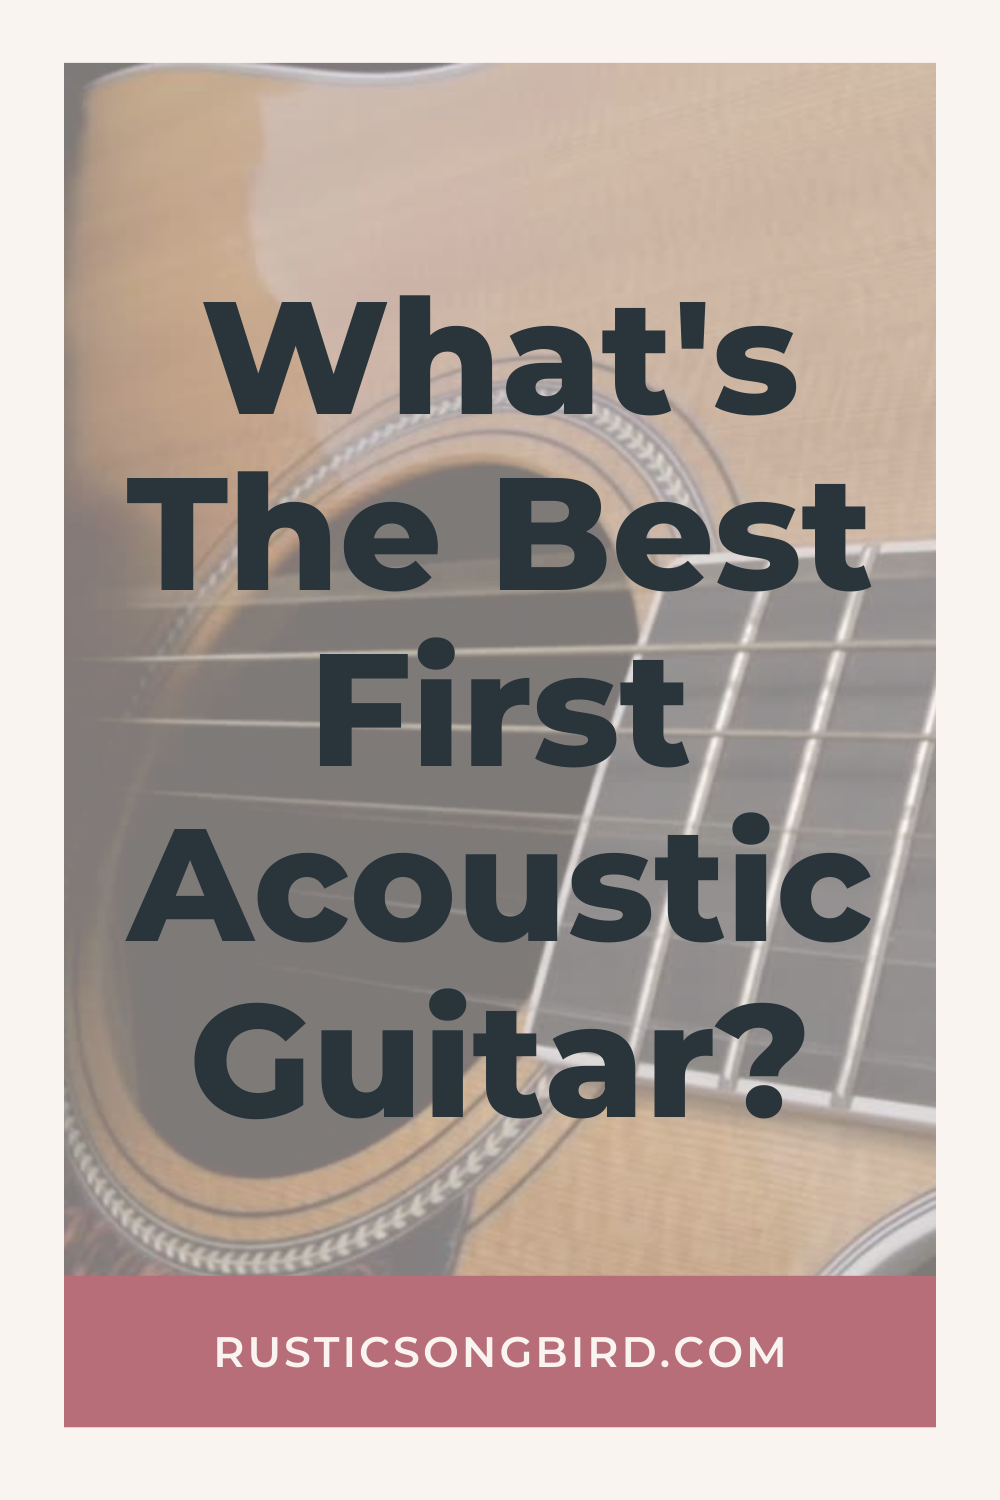 acoustic guitar in the background and text for the title of the blog post called "Best first Acoustic Guitar for beginners"